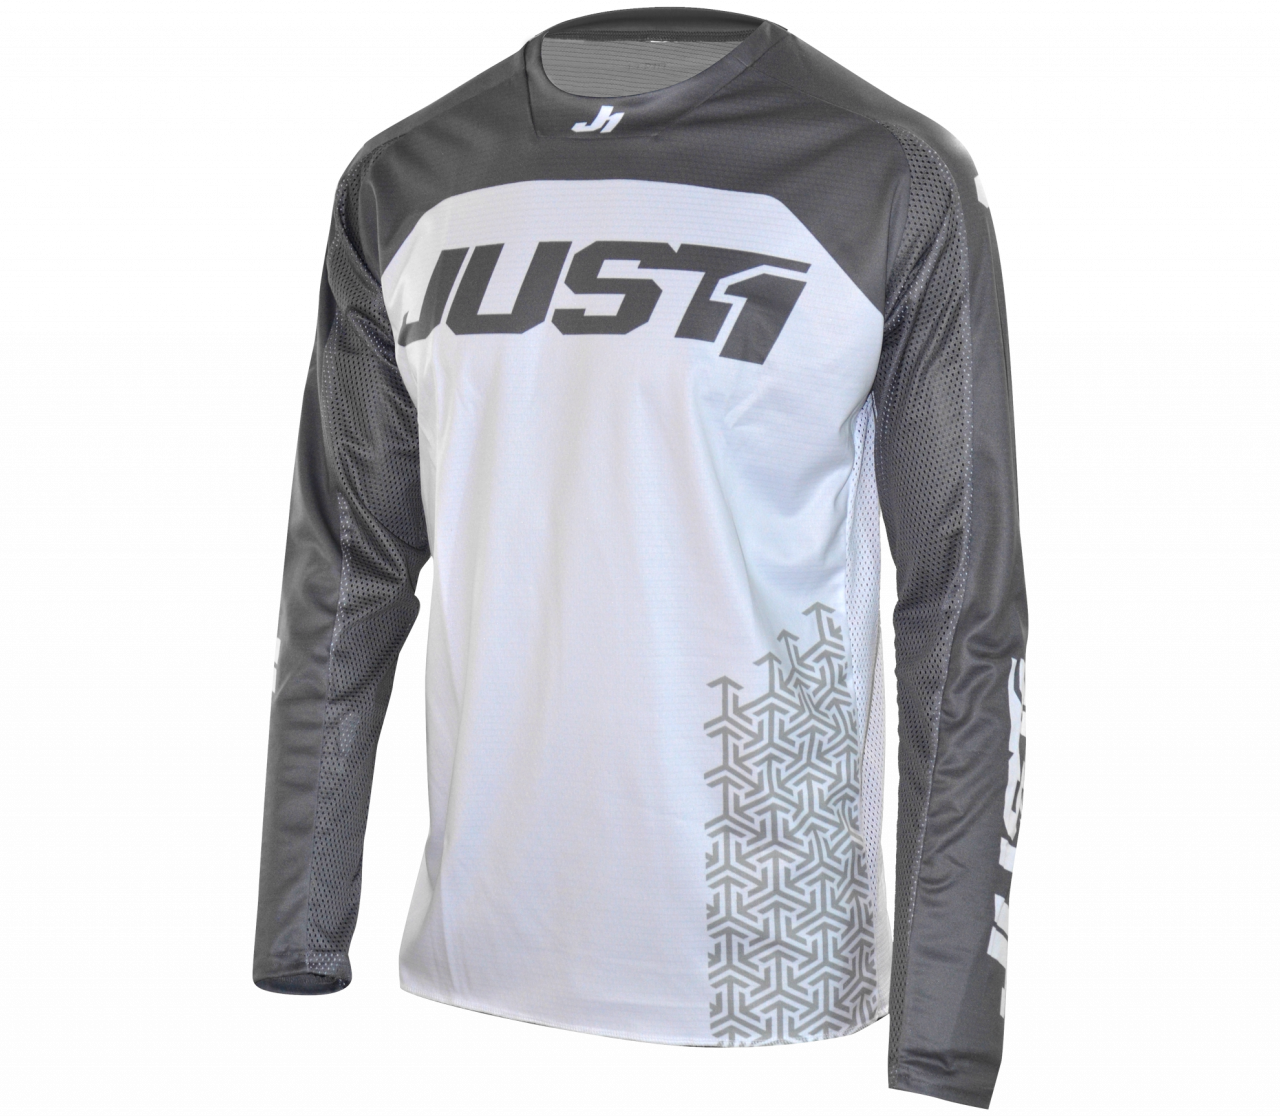 JUST1 JERSEY J-FORCE TERRA WHITE-GREY